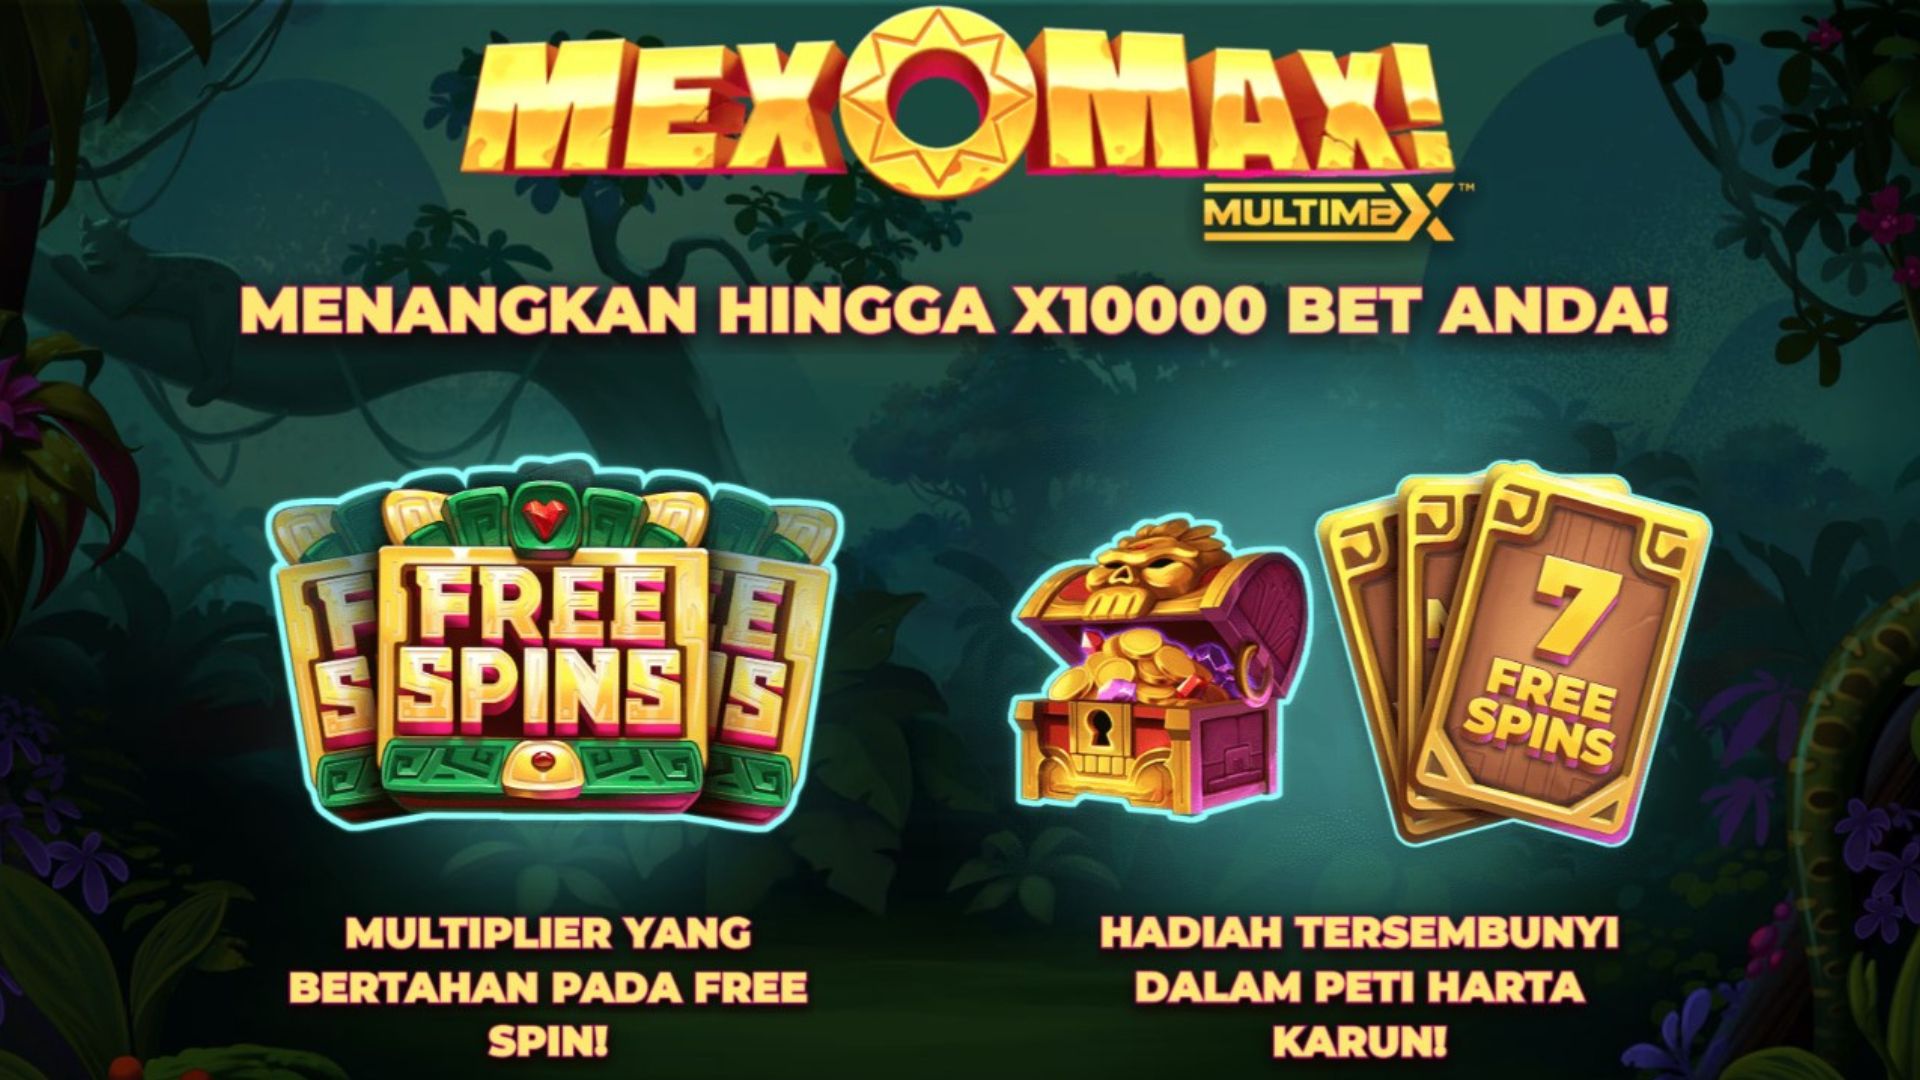 fitur freespin slot mexomax! multimax